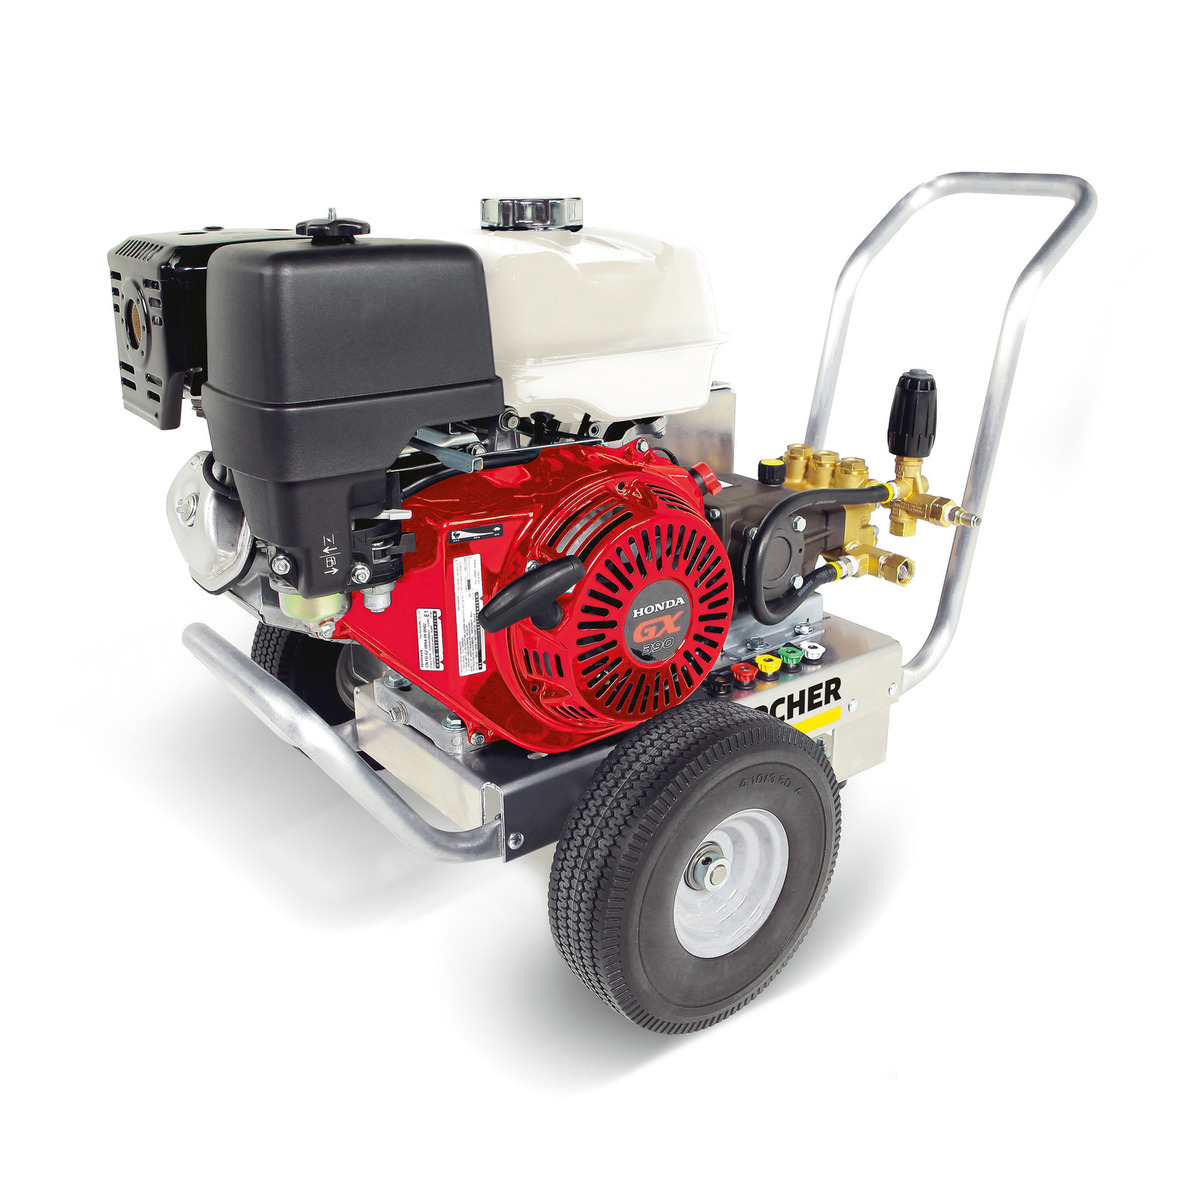 Heavy Duty 4000psi Gas Powered Cold Water Pressure Washer - Cleaning & Pressure Washers